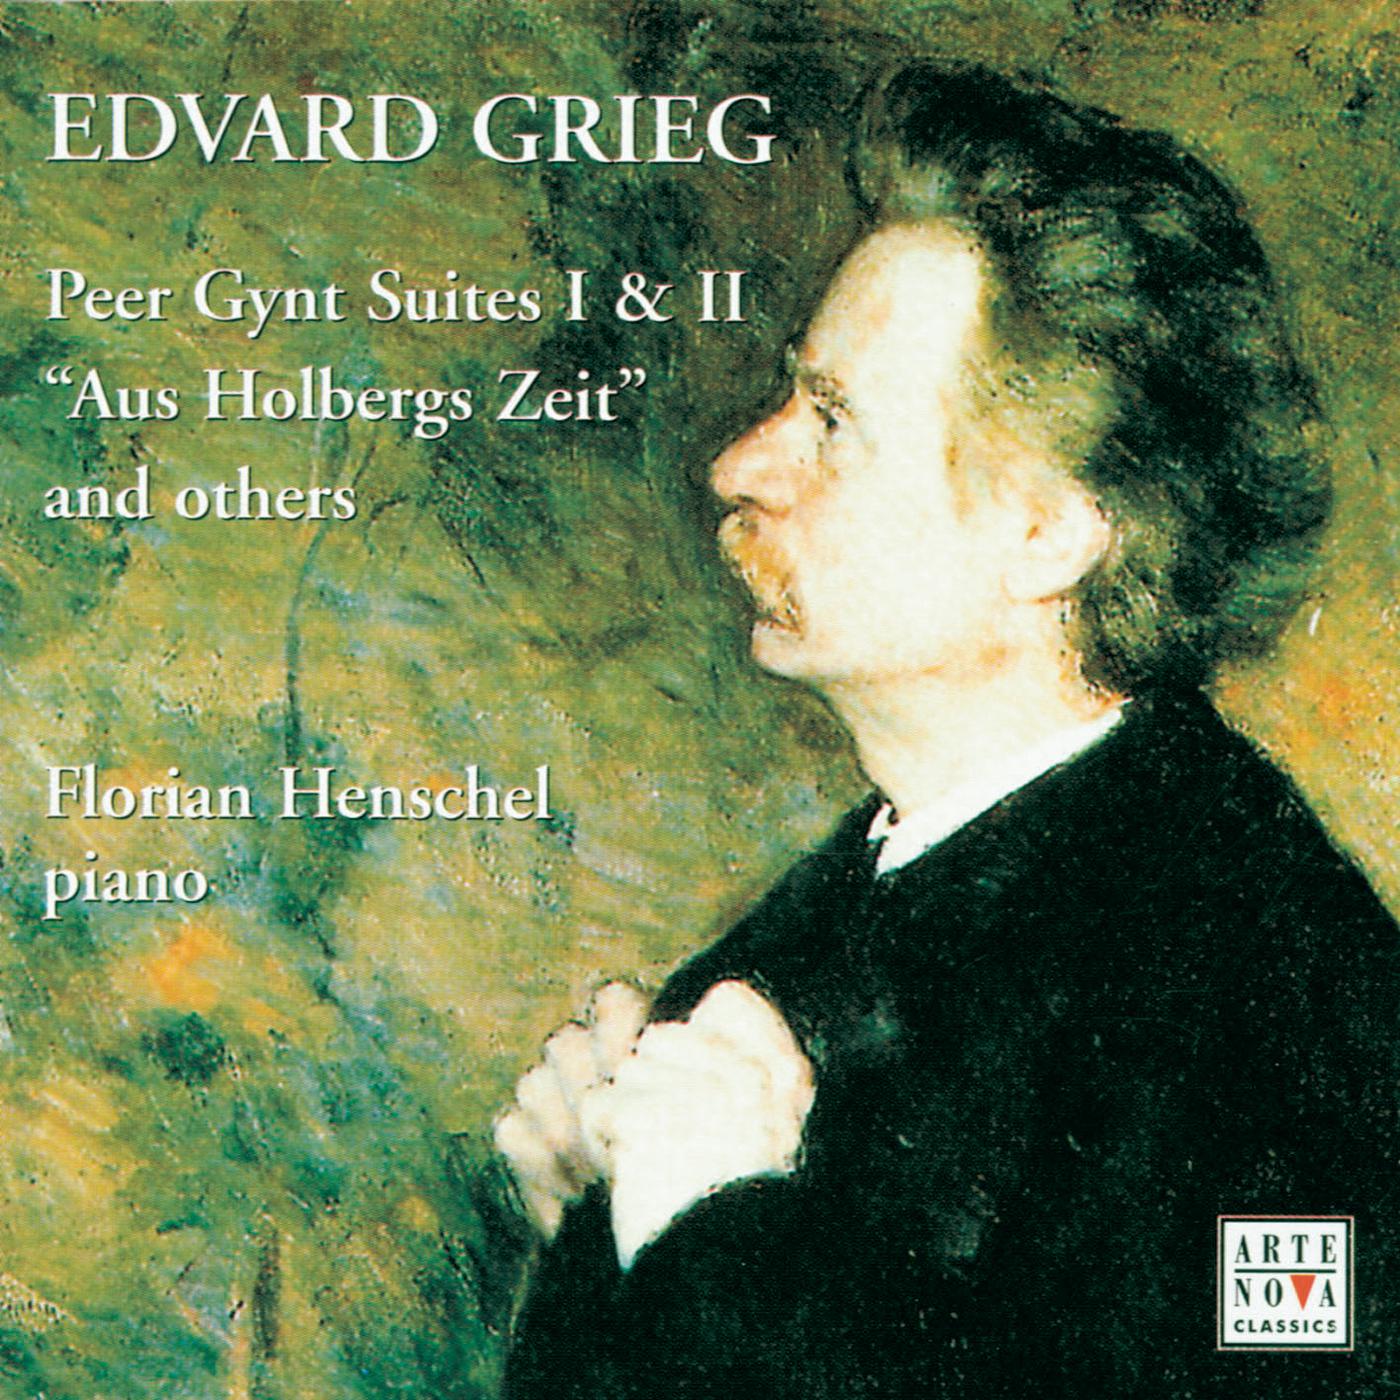 Peer Gynt Suite No. 1, Op. 46, Arr. for Piano:I. Morning Mood